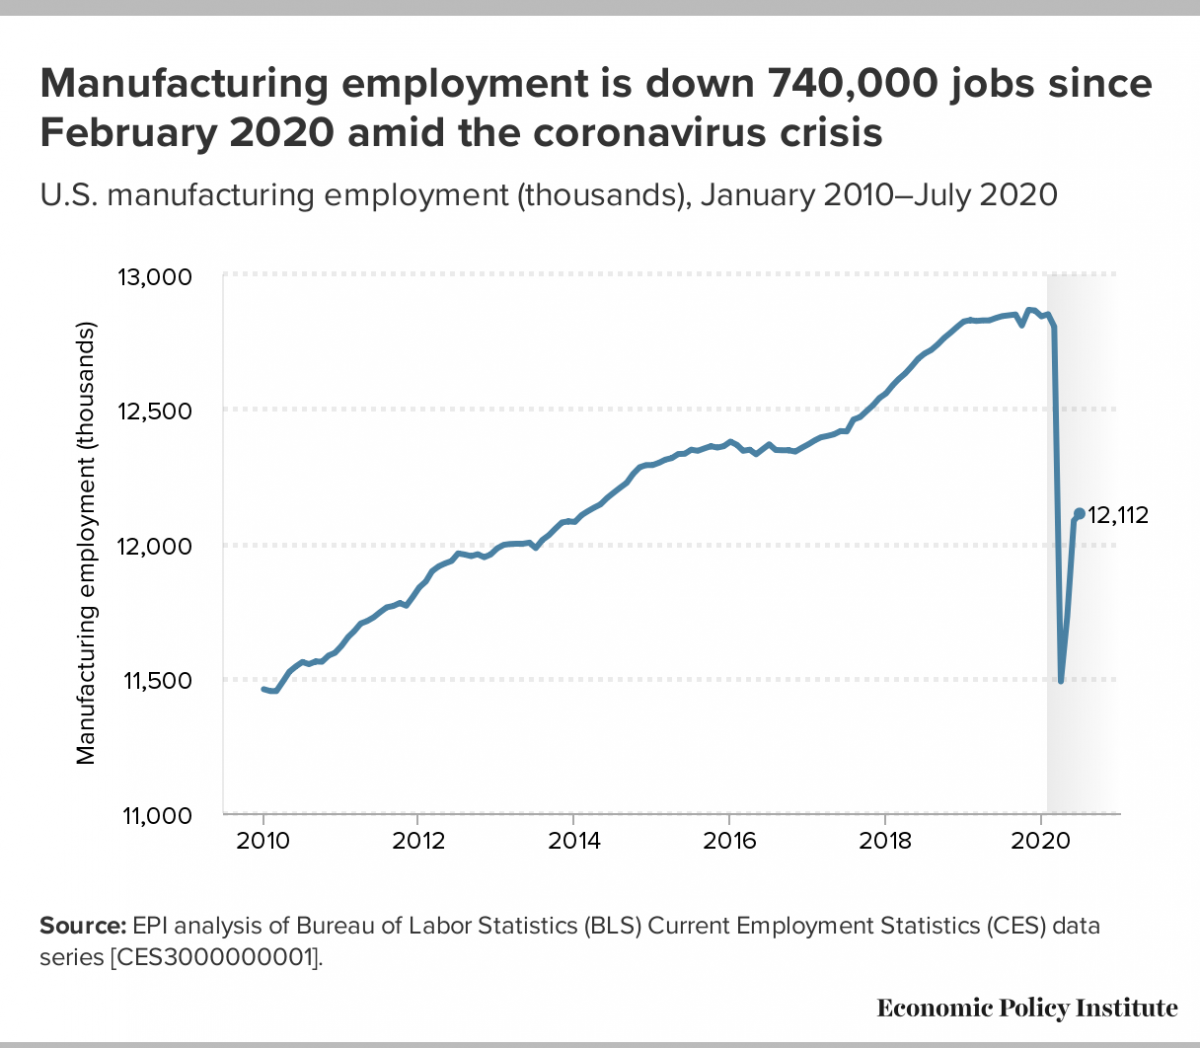 Manufacturing employment is down 740,000 jobs since February 2020 amid the coronavirus crisis